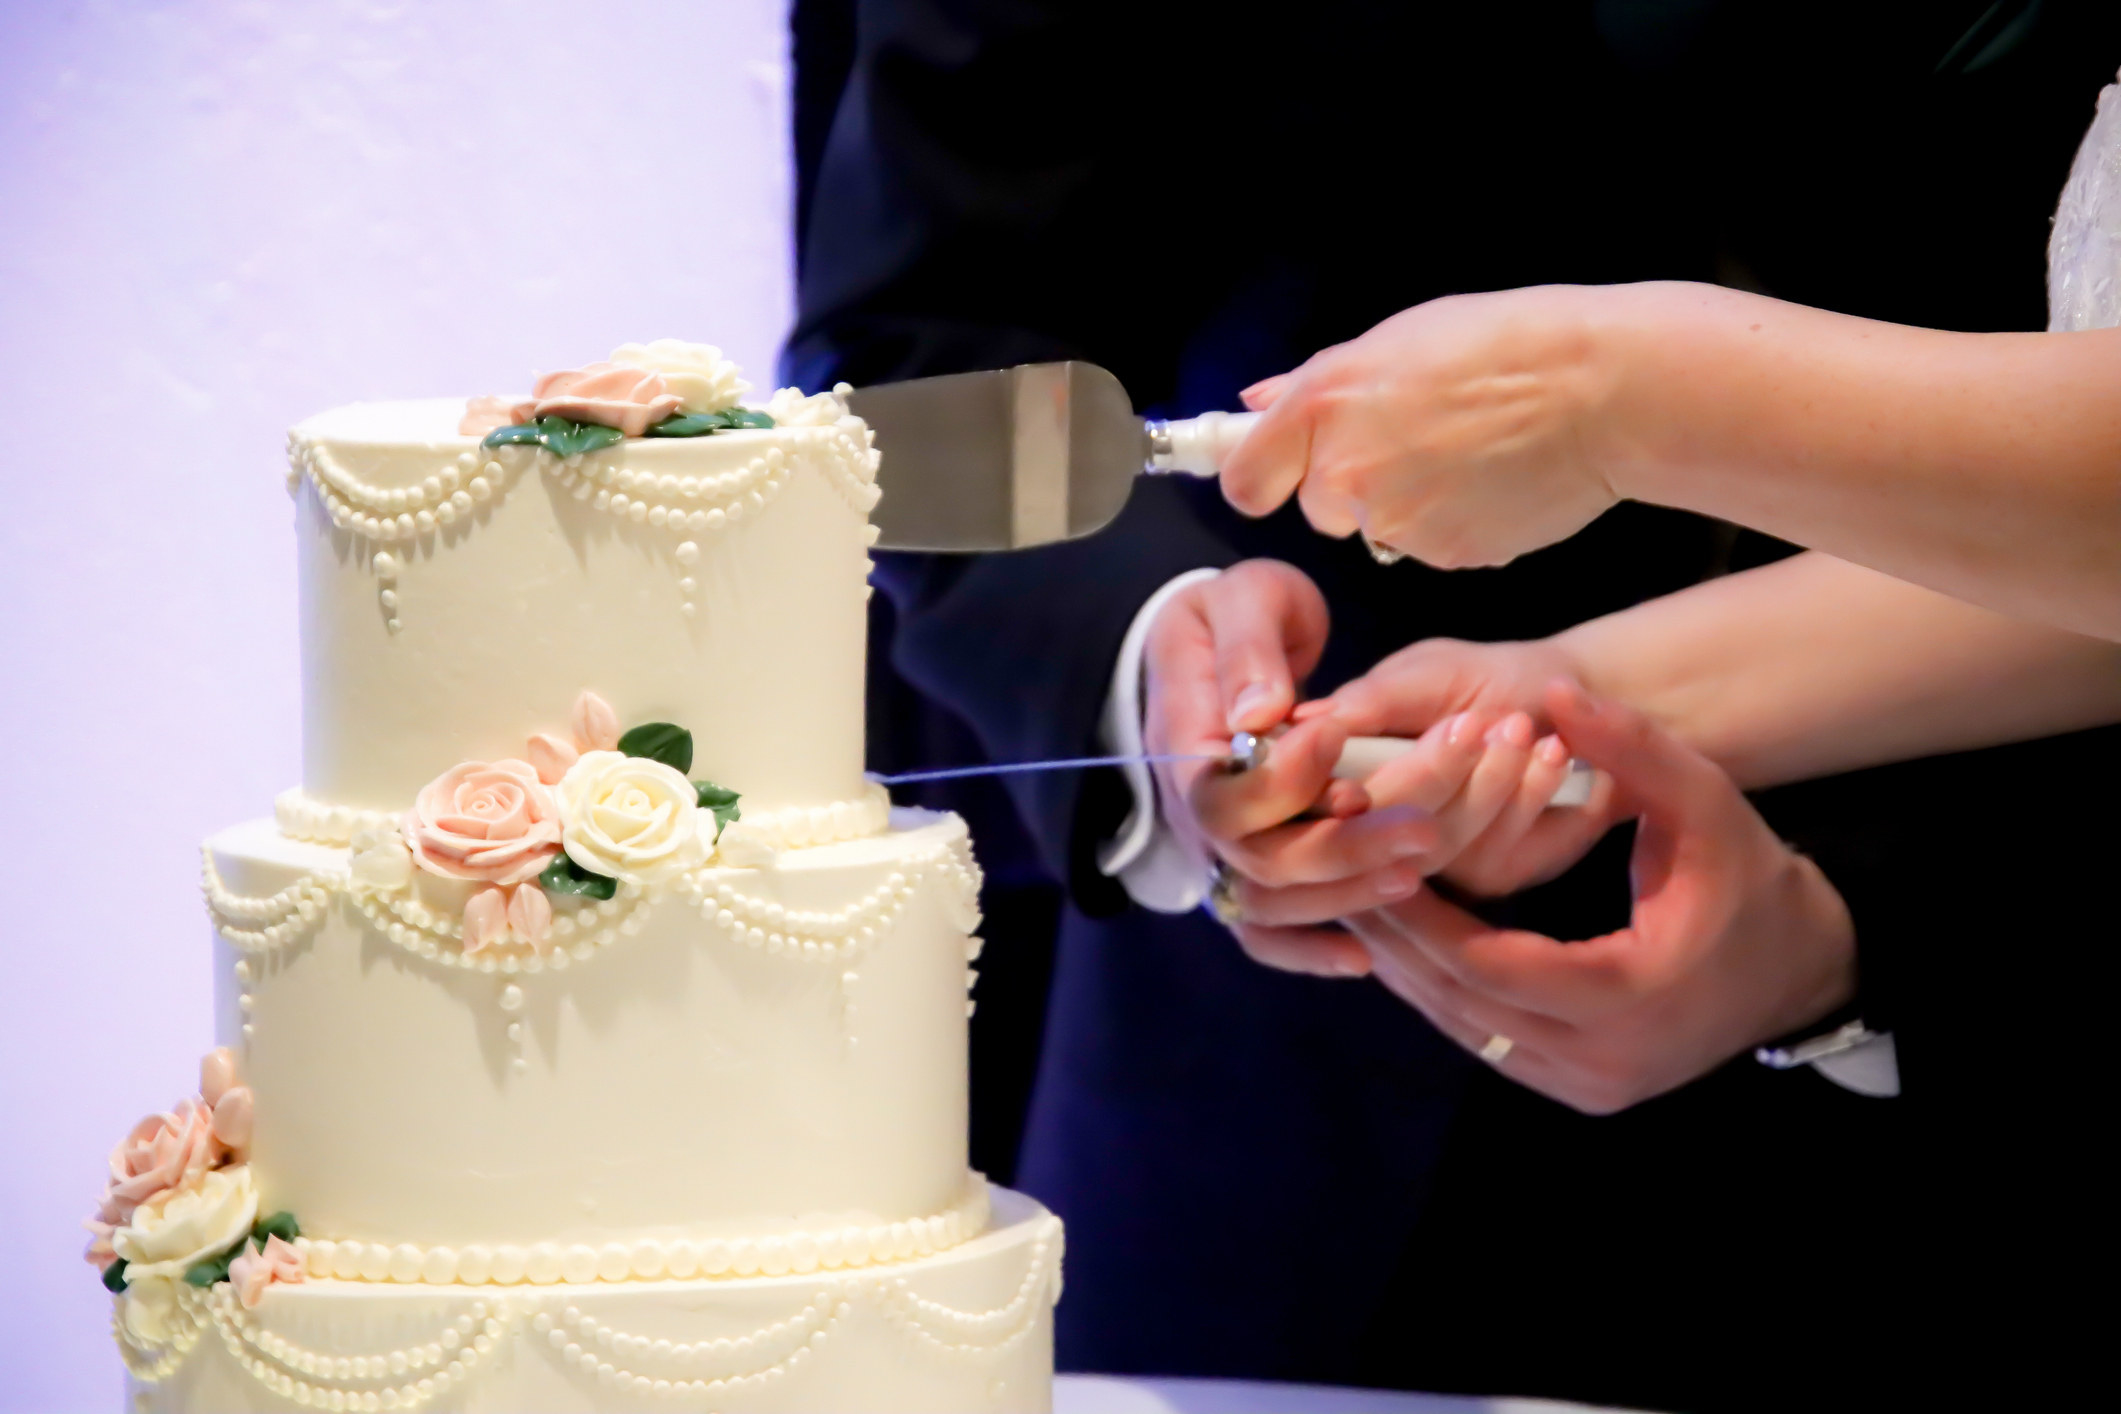 Bride and groom cutting a three-tiered cake